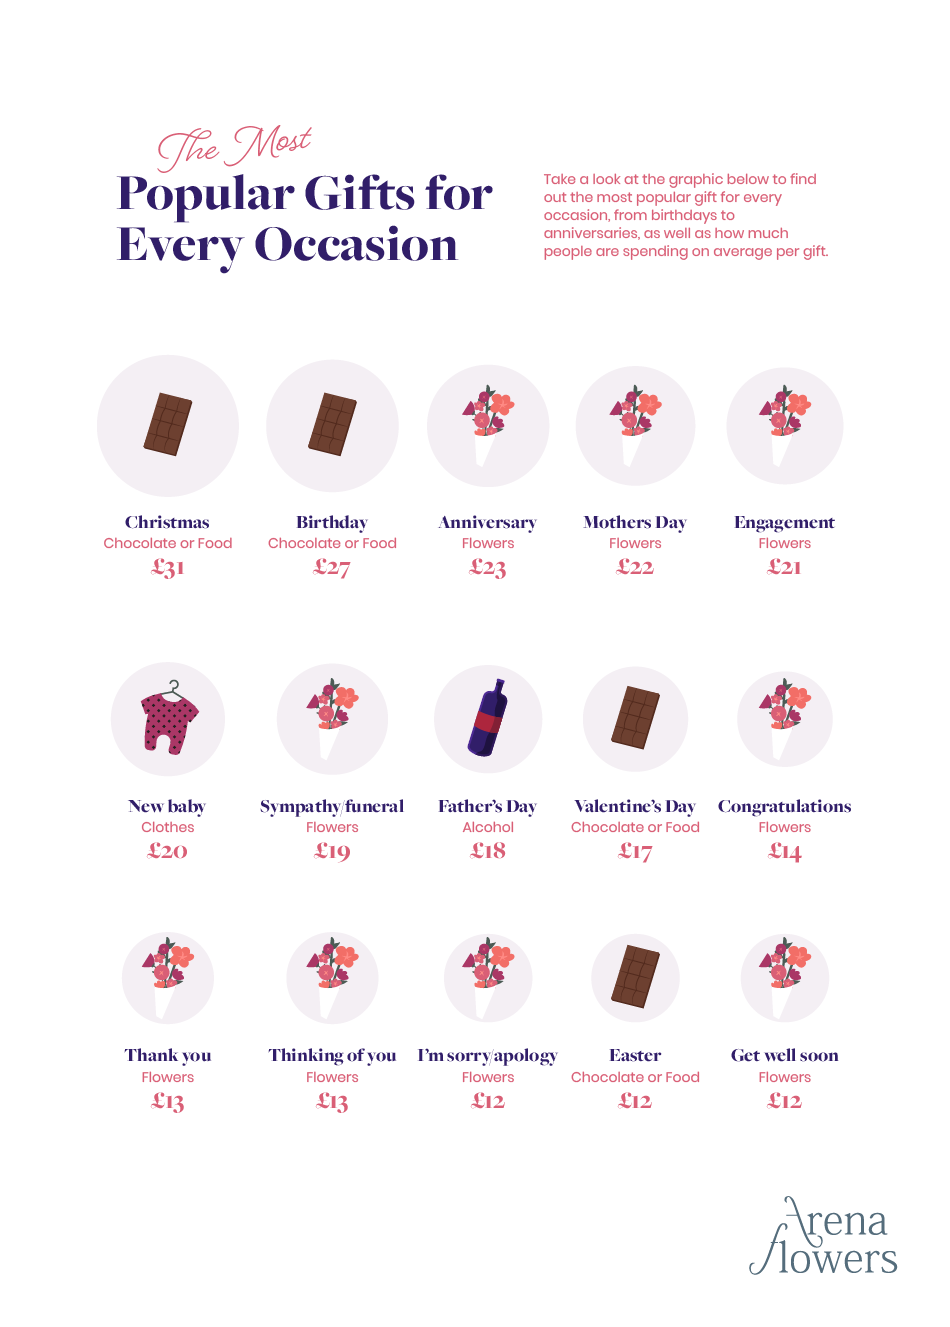 graphic showing the most popular gifts for each occasion